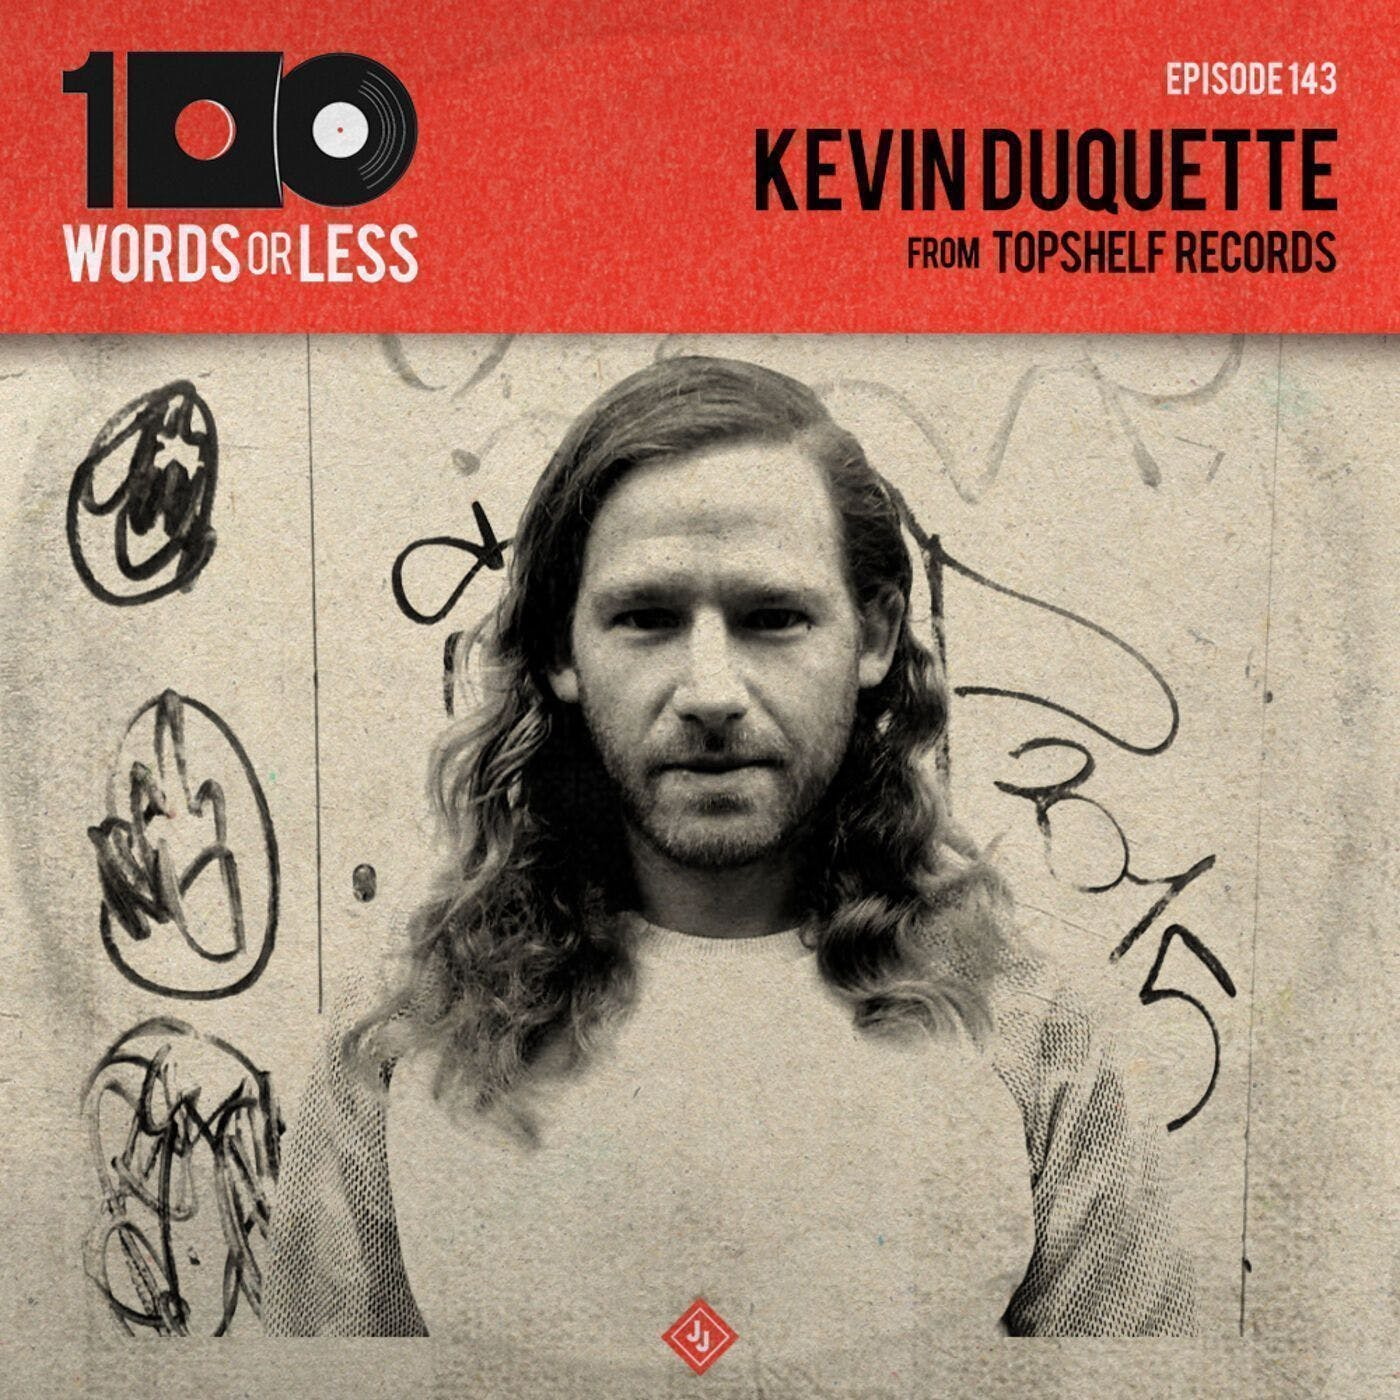 Kevin Duquette from Topshelf Records